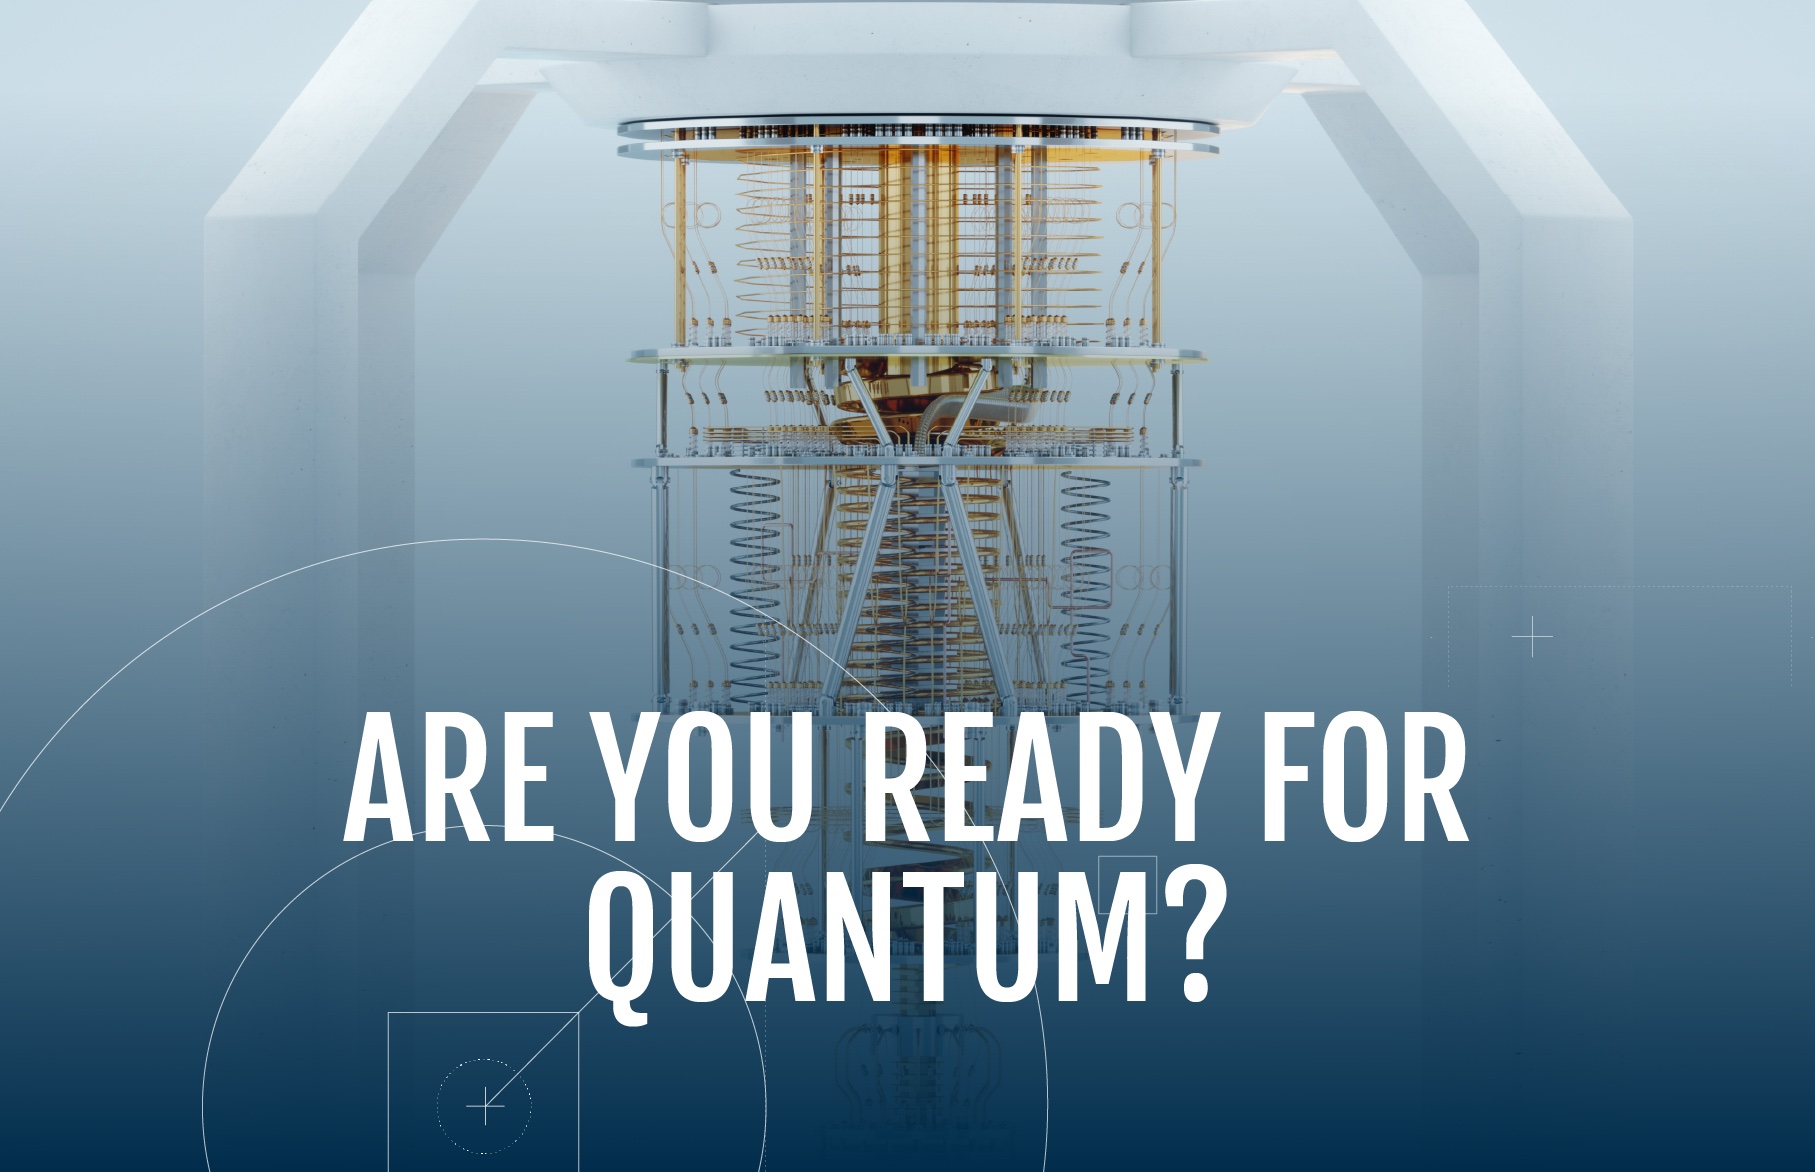 Are you ready for quantum?